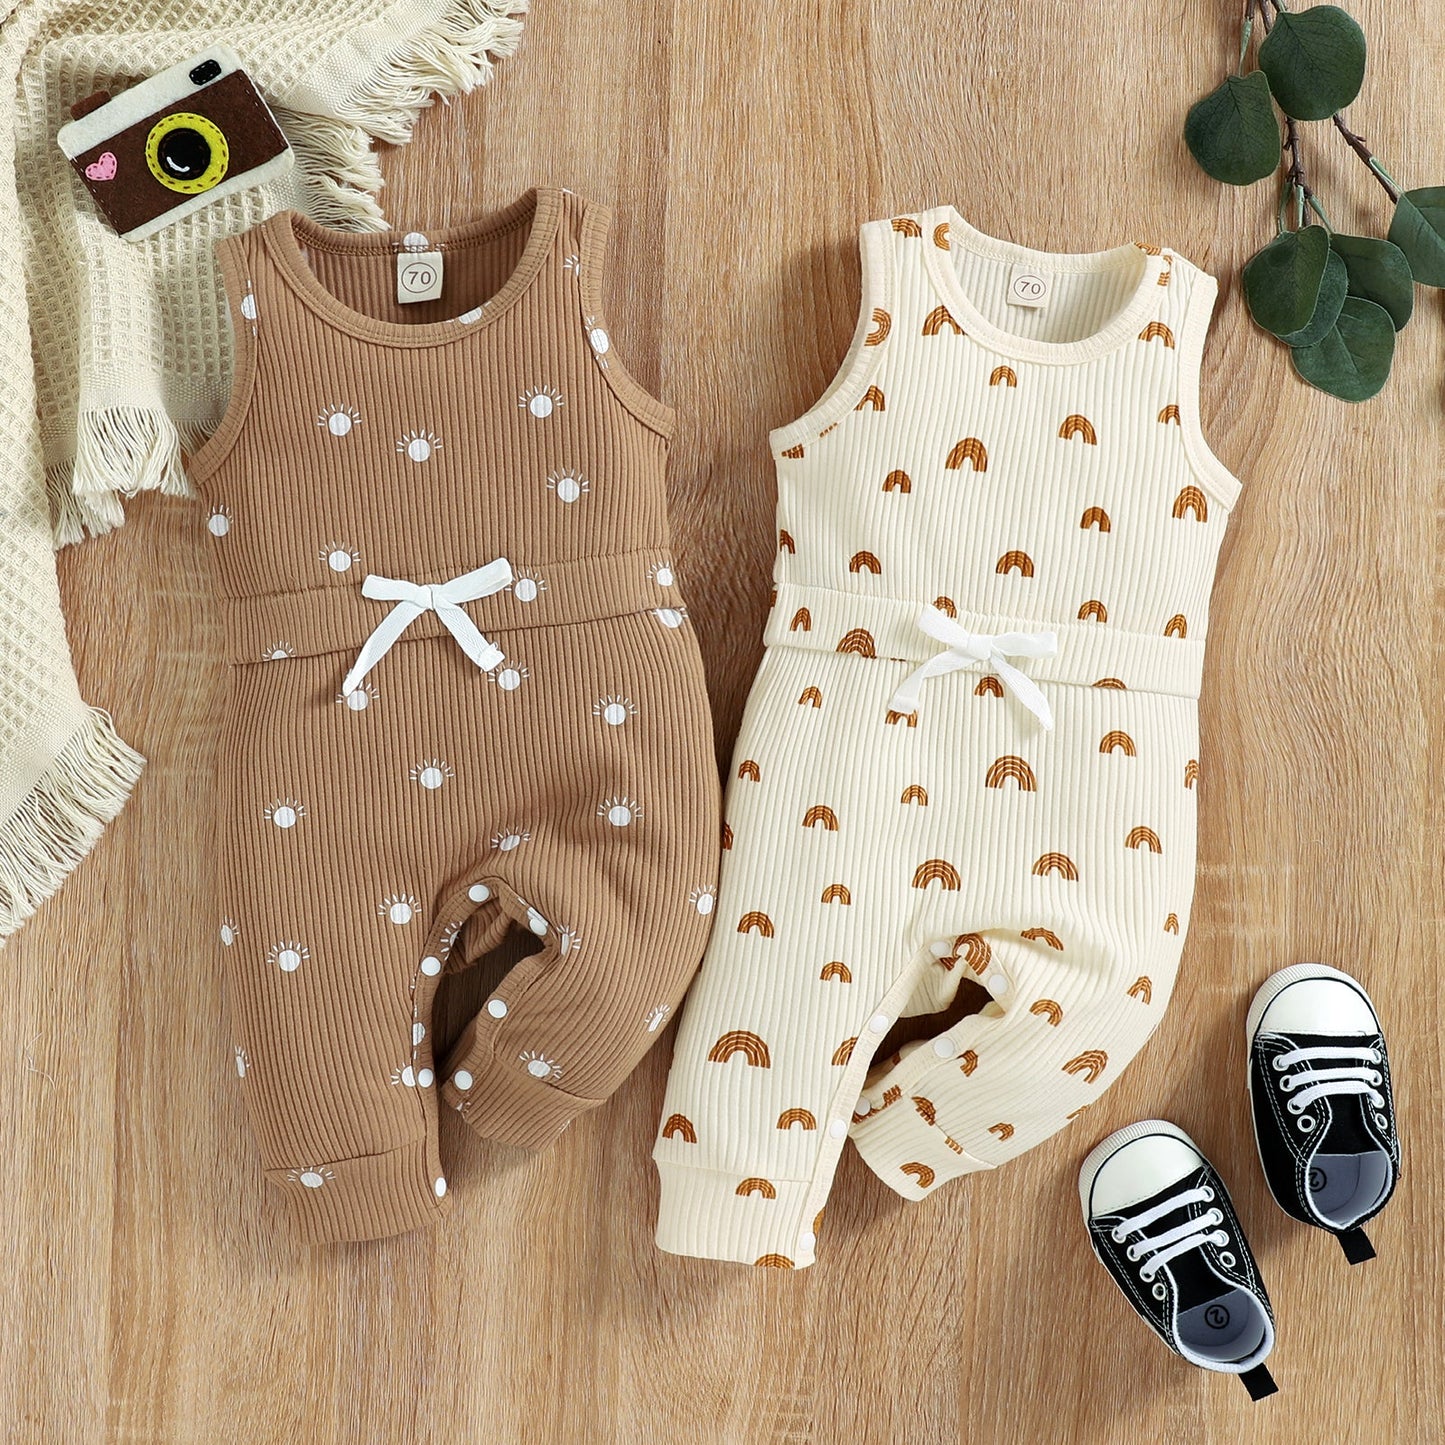 Baby Two-tone Jumpsuits Pawlulu